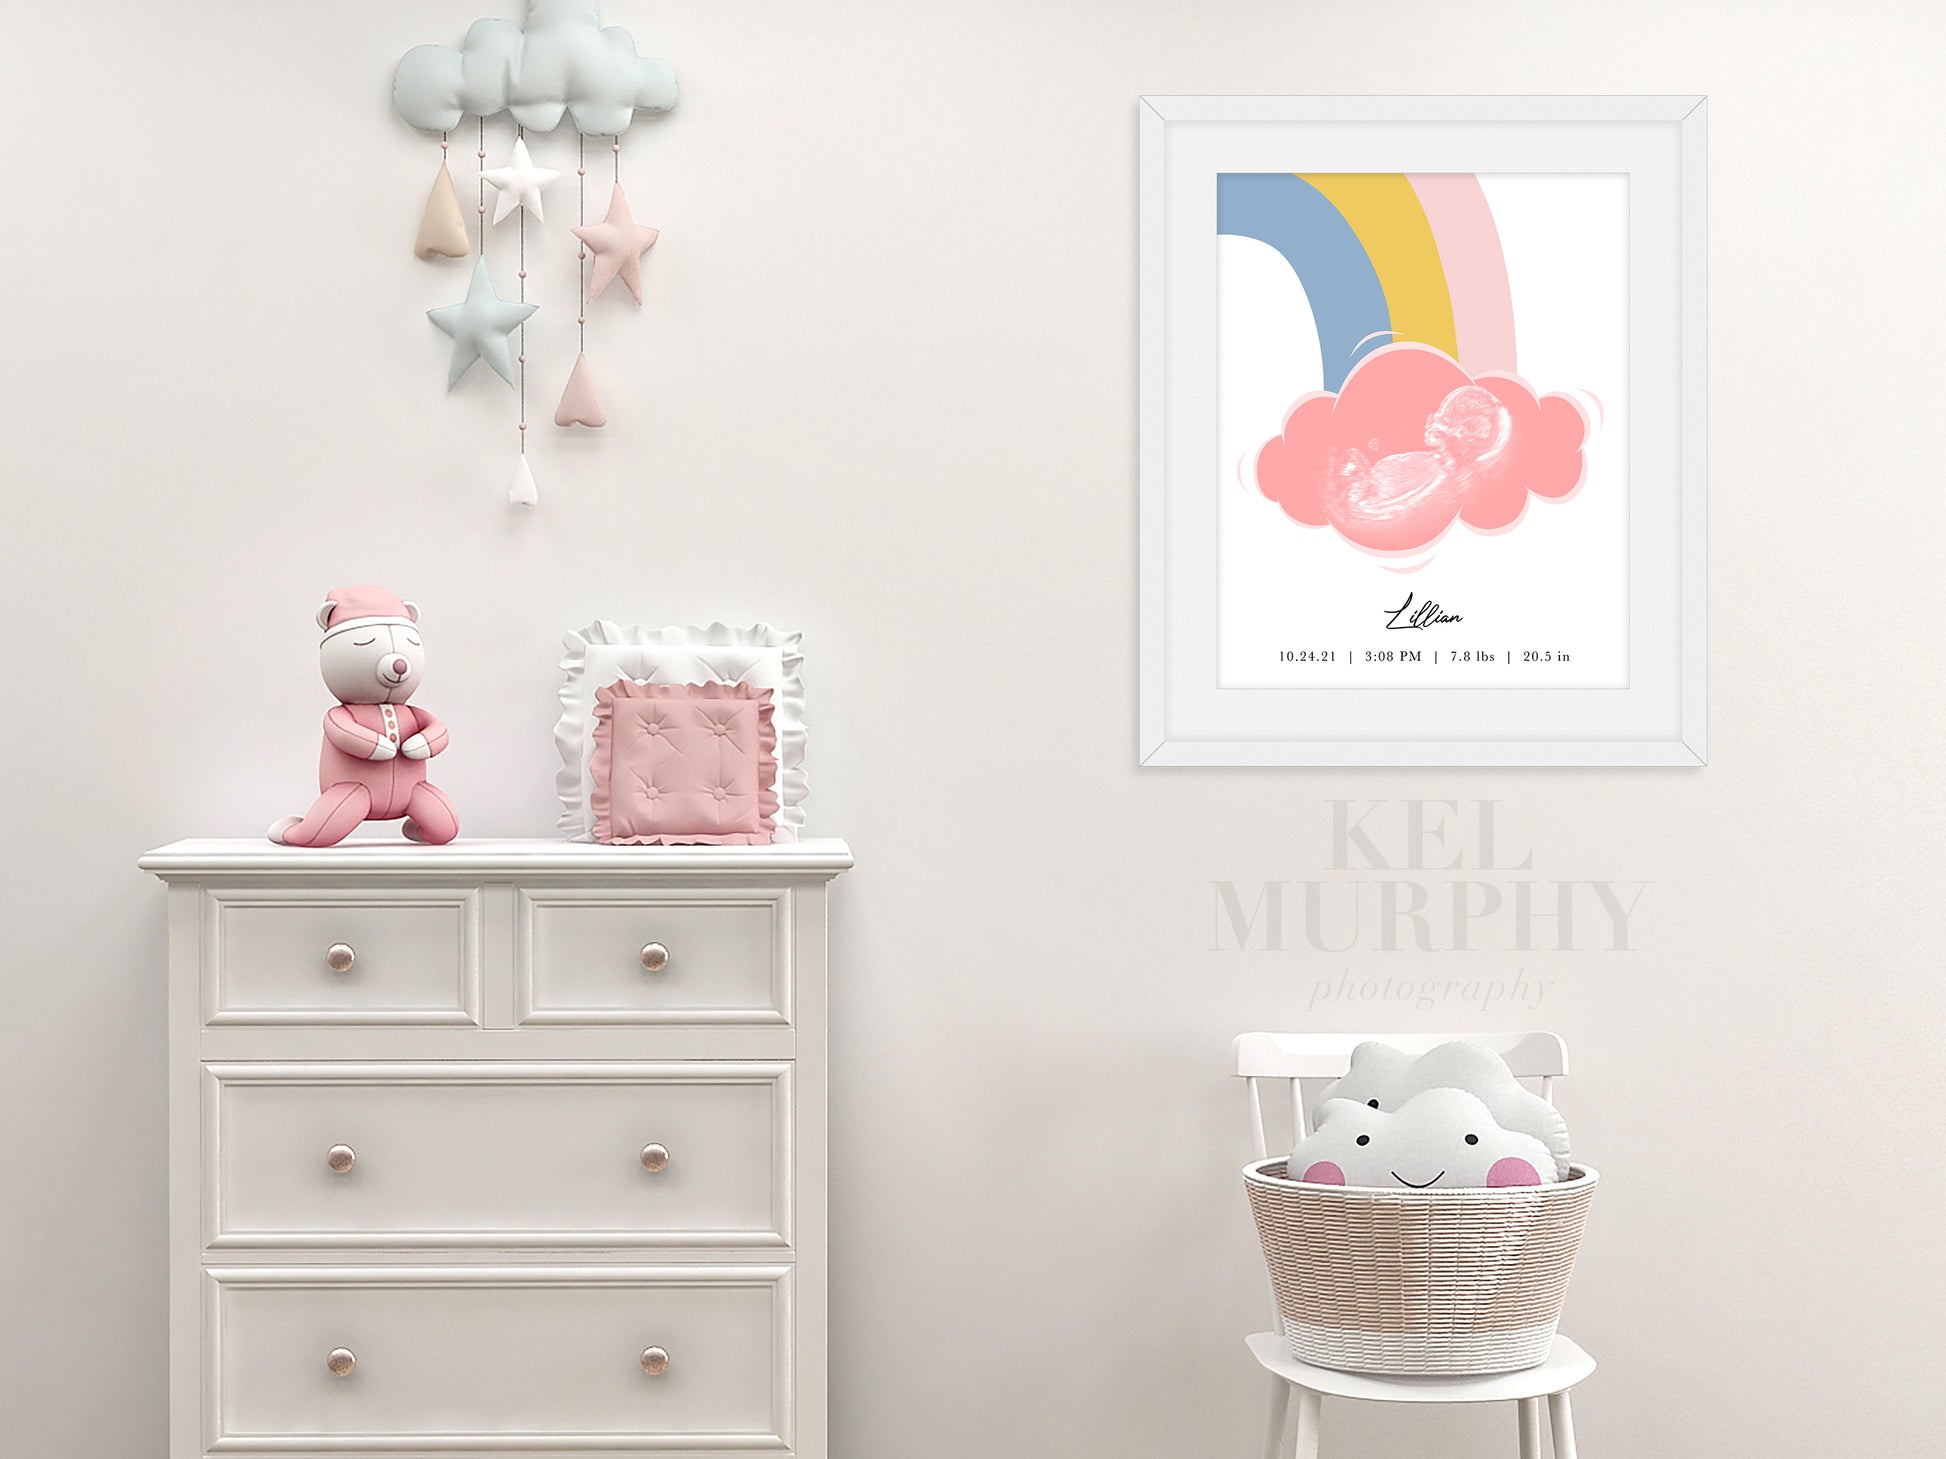 Ultrasound art print with rainbow and cloud baby personalized custom name date framed in nursery